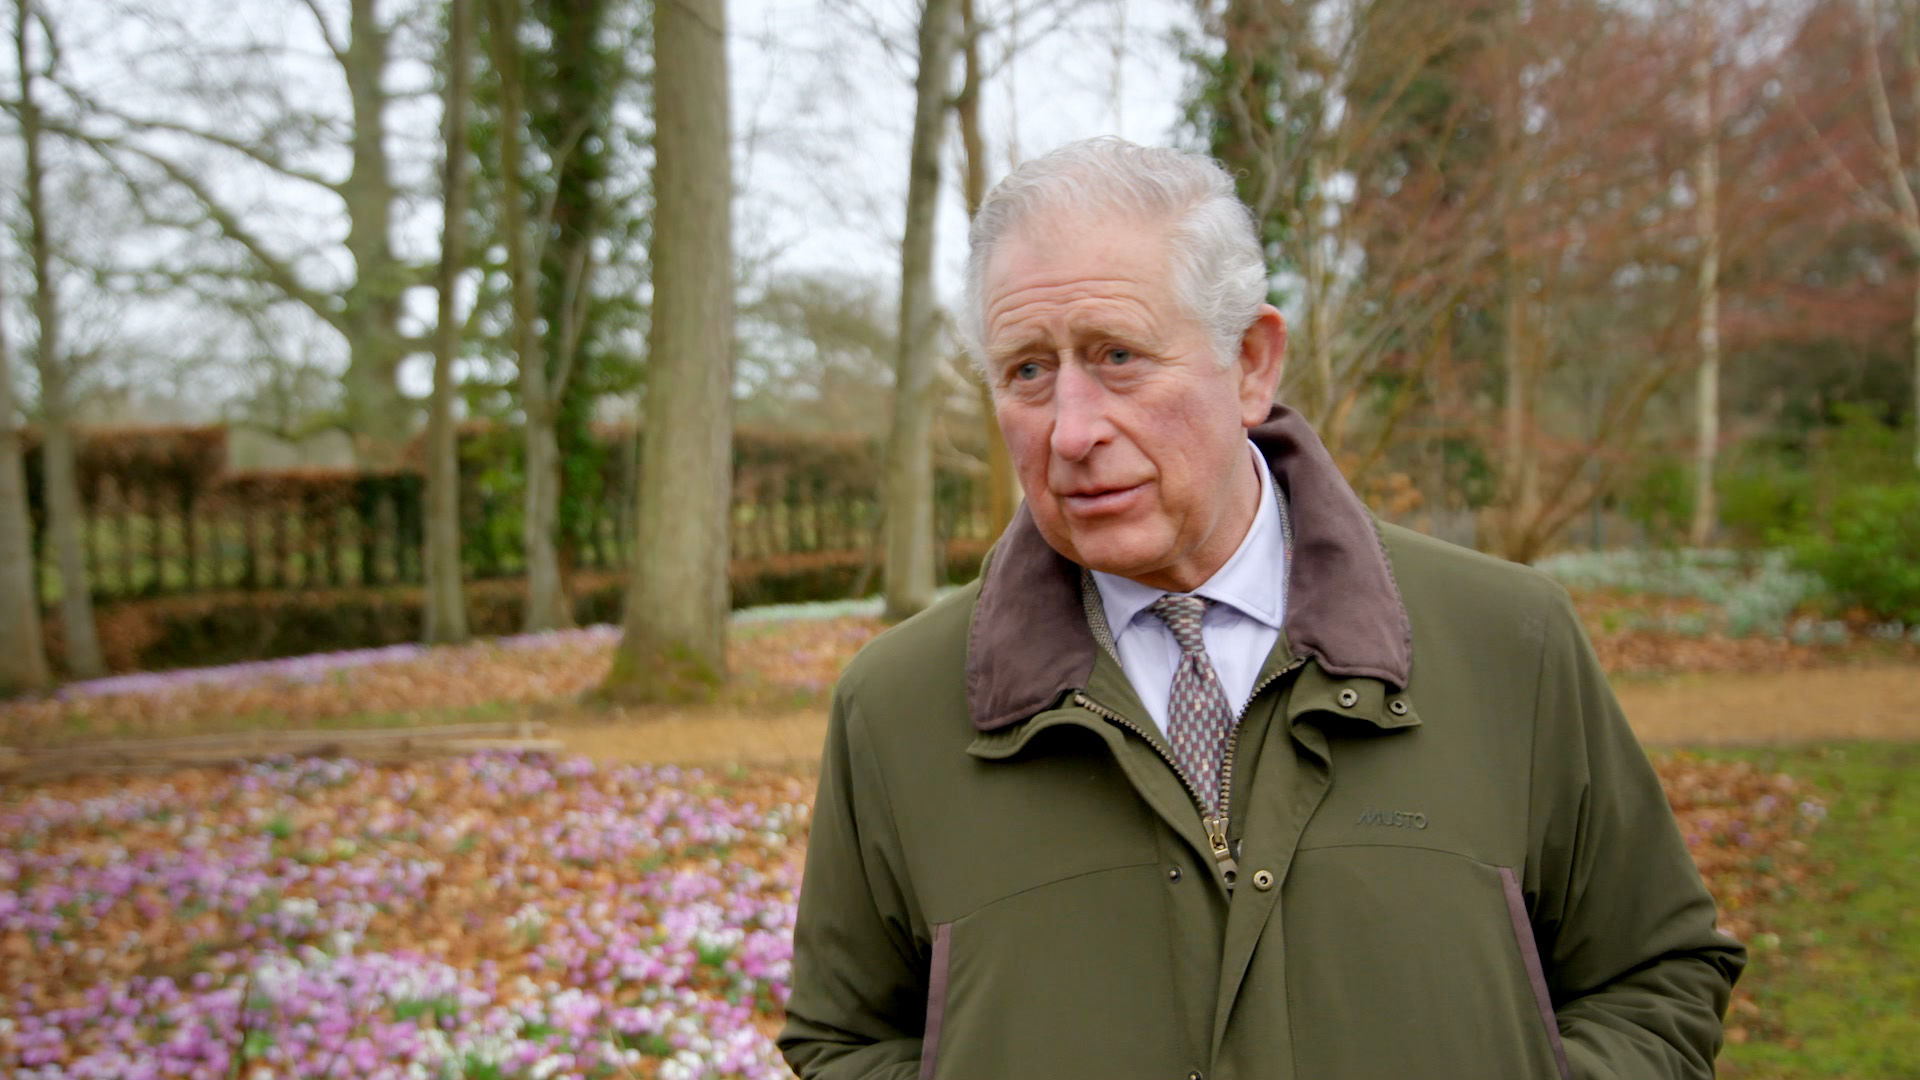 The Prince of Wales interviewed in the Duchy of Cornwall documentary